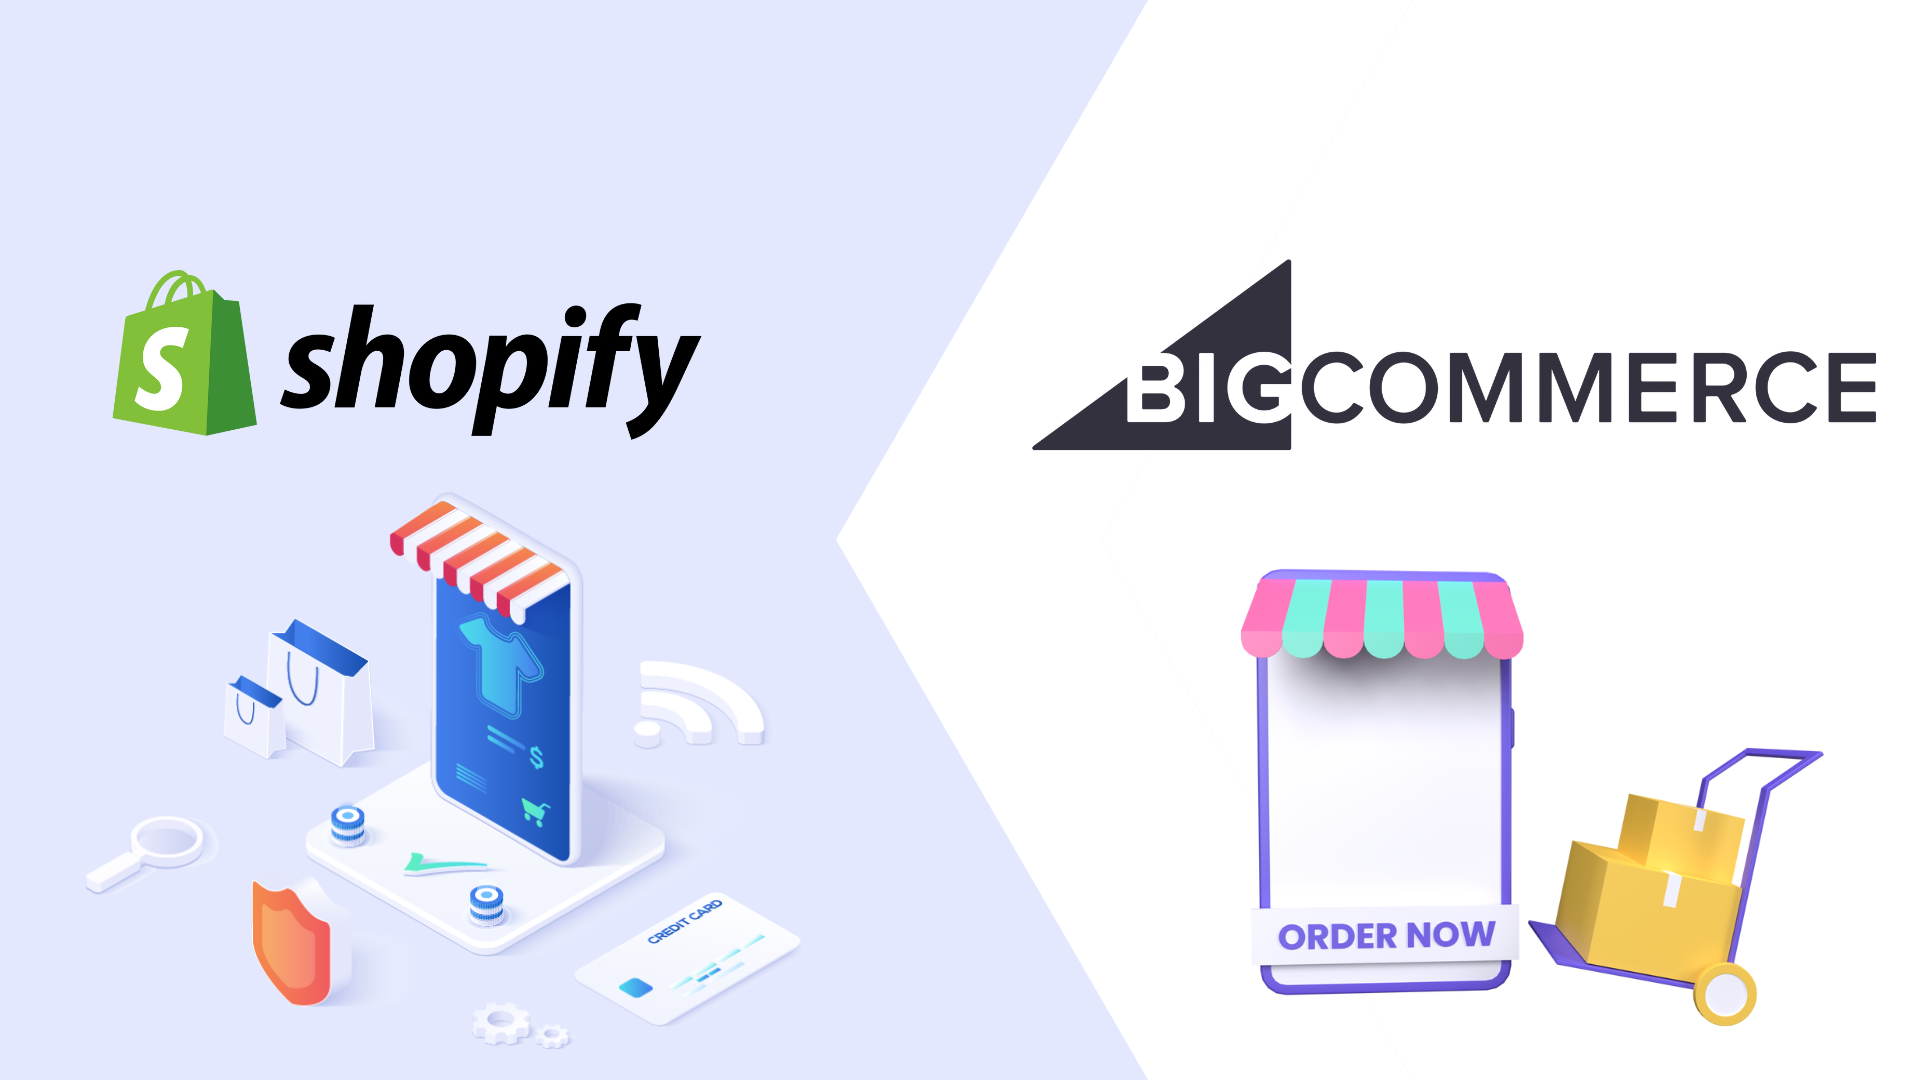 Bigcommerce vs Shopify: The important differences you need to consider (2022)